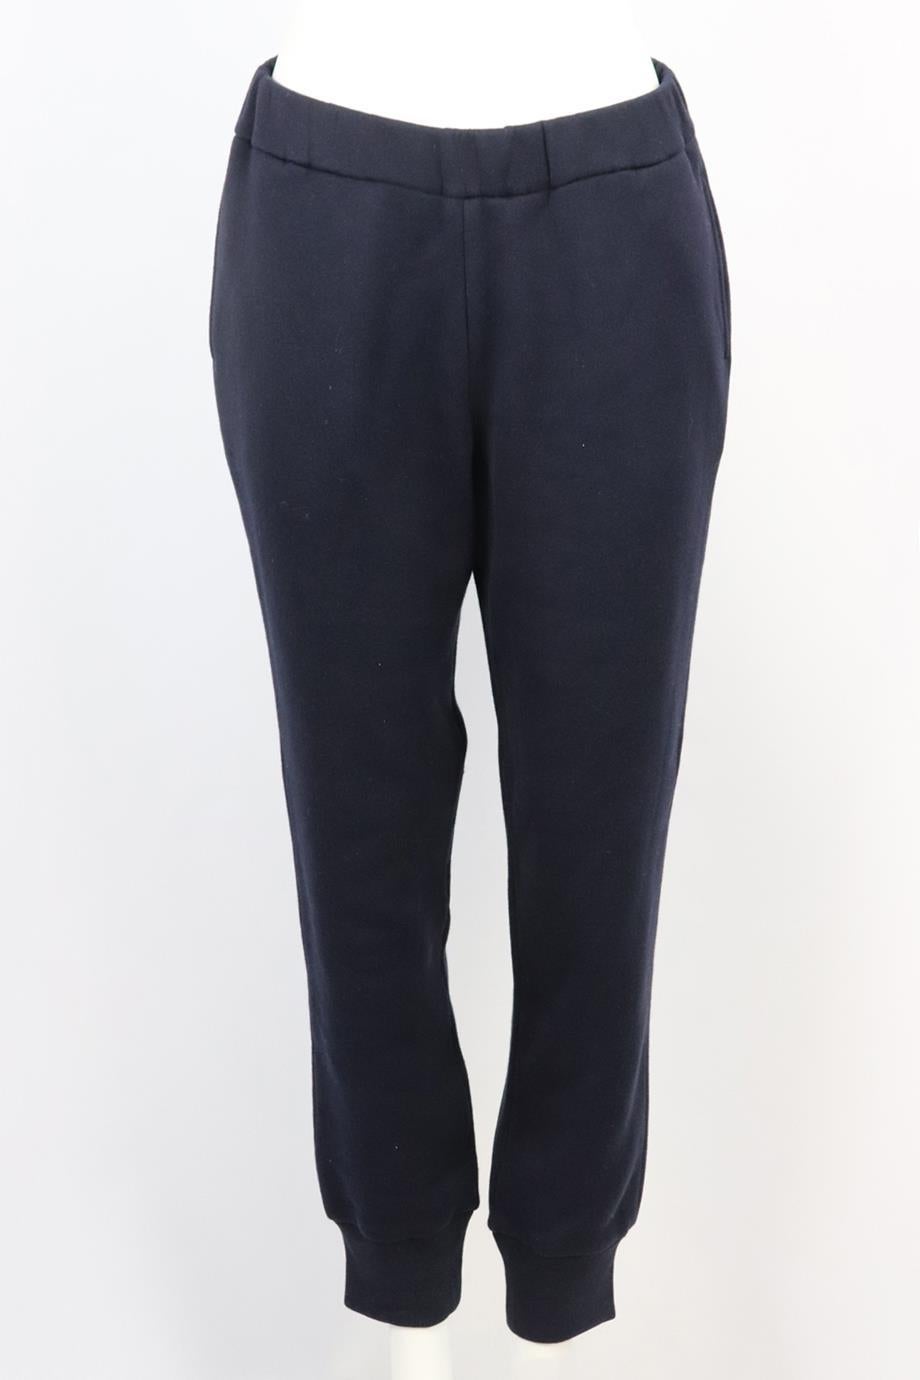 The Row cotton jersey track pants. Navy. Pull on. 100% Cotton. Size: Medium (UK 10, US 6, FR 38, IT 42). Waist: 30 in. Hips: 41 in. Length: 39.5 in. Inseam: 28.5 in. Rise: 13 in. Very good condition - As new condition, no sign of wear; see pictures.
